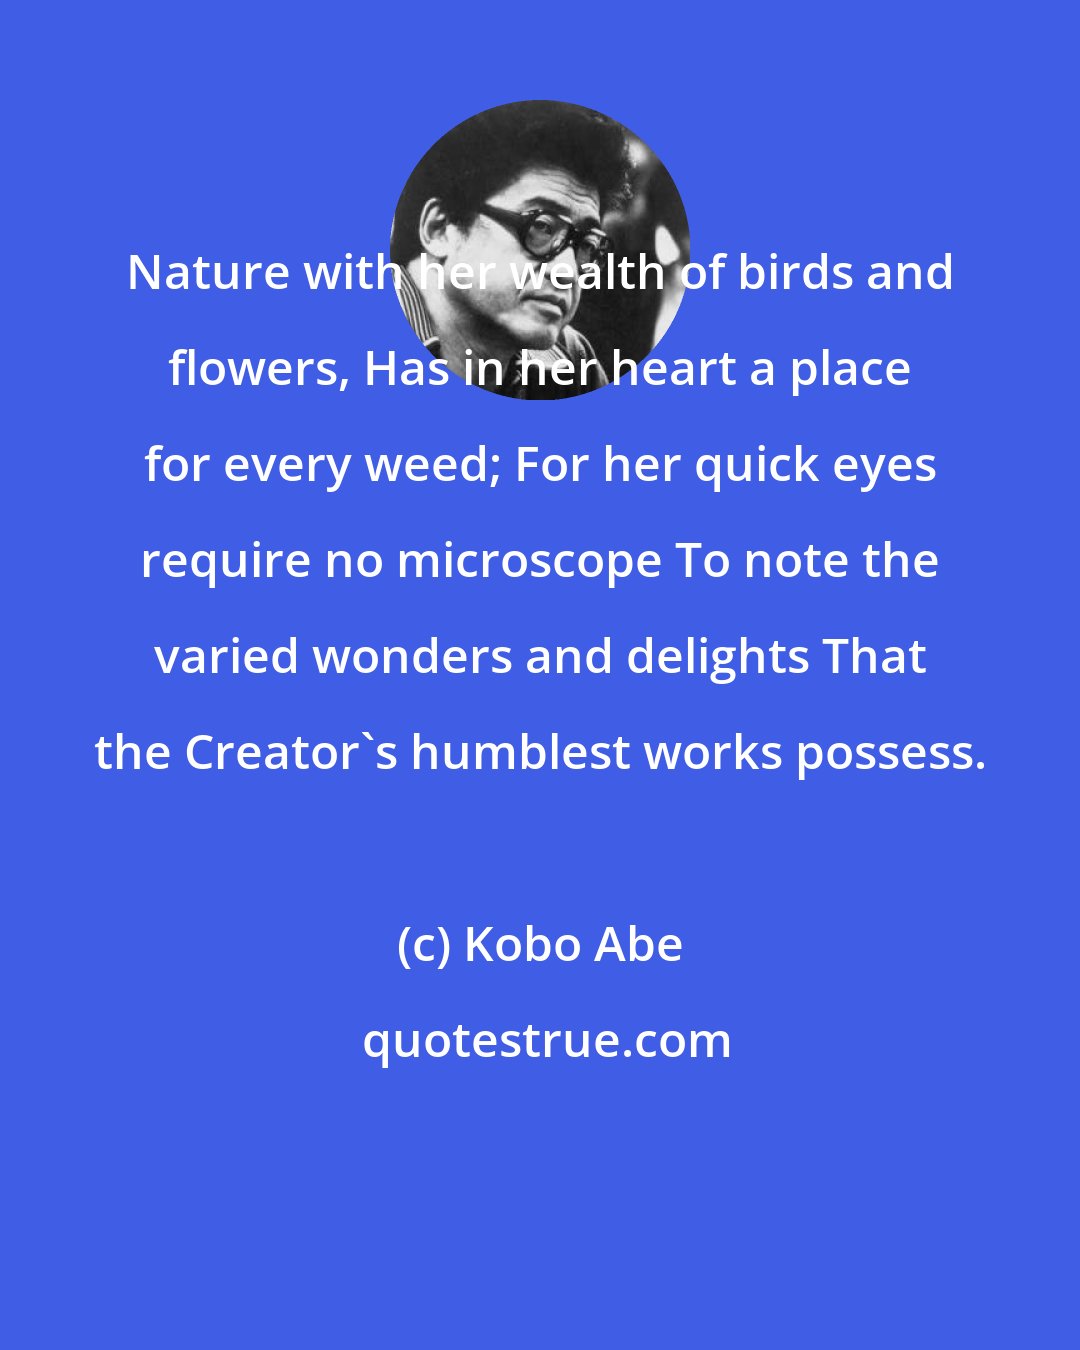 Kobo Abe: Nature with her wealth of birds and flowers, Has in her heart a place for every weed; For her quick eyes require no microscope To note the varied wonders and delights That the Creator's humblest works possess.